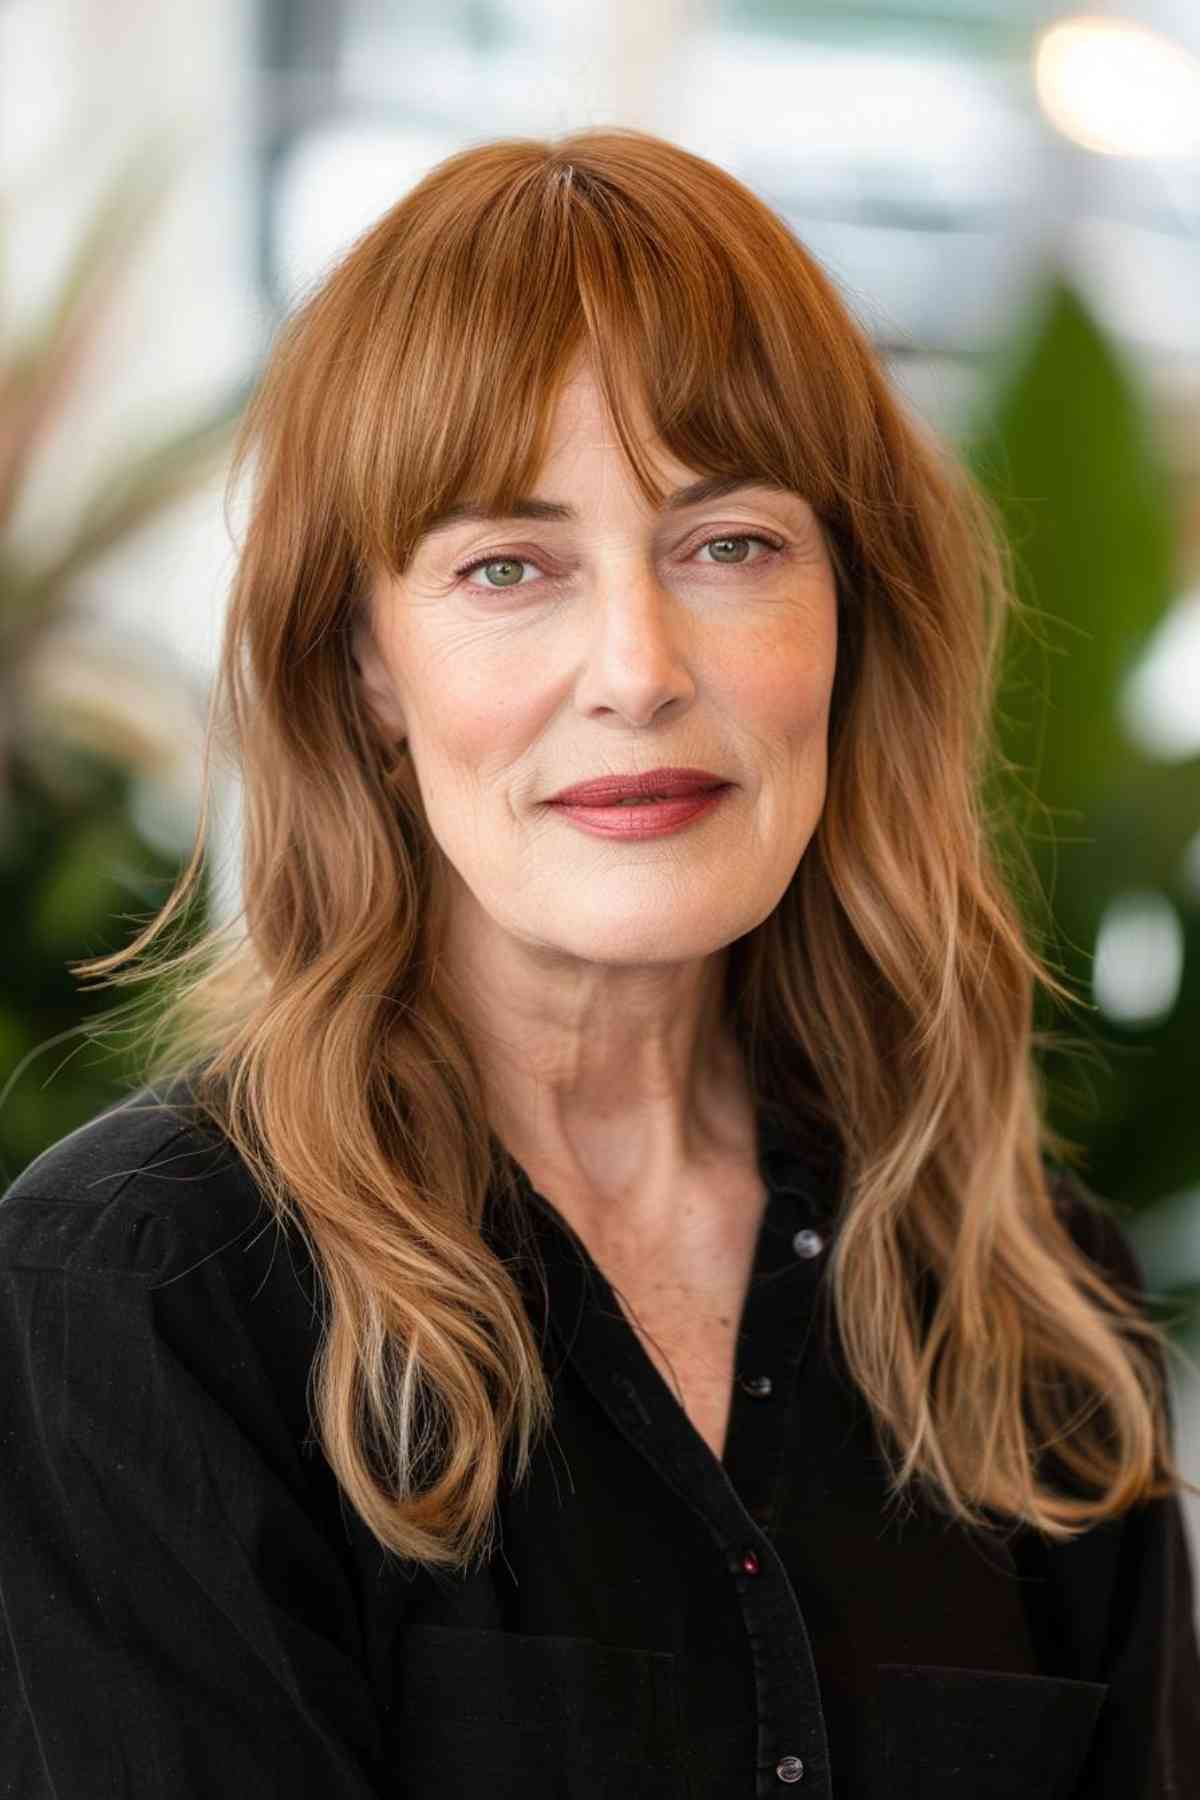 A woman over 60 with soft bangs and warm-toned medium length hair, a style that complements her long face shape.